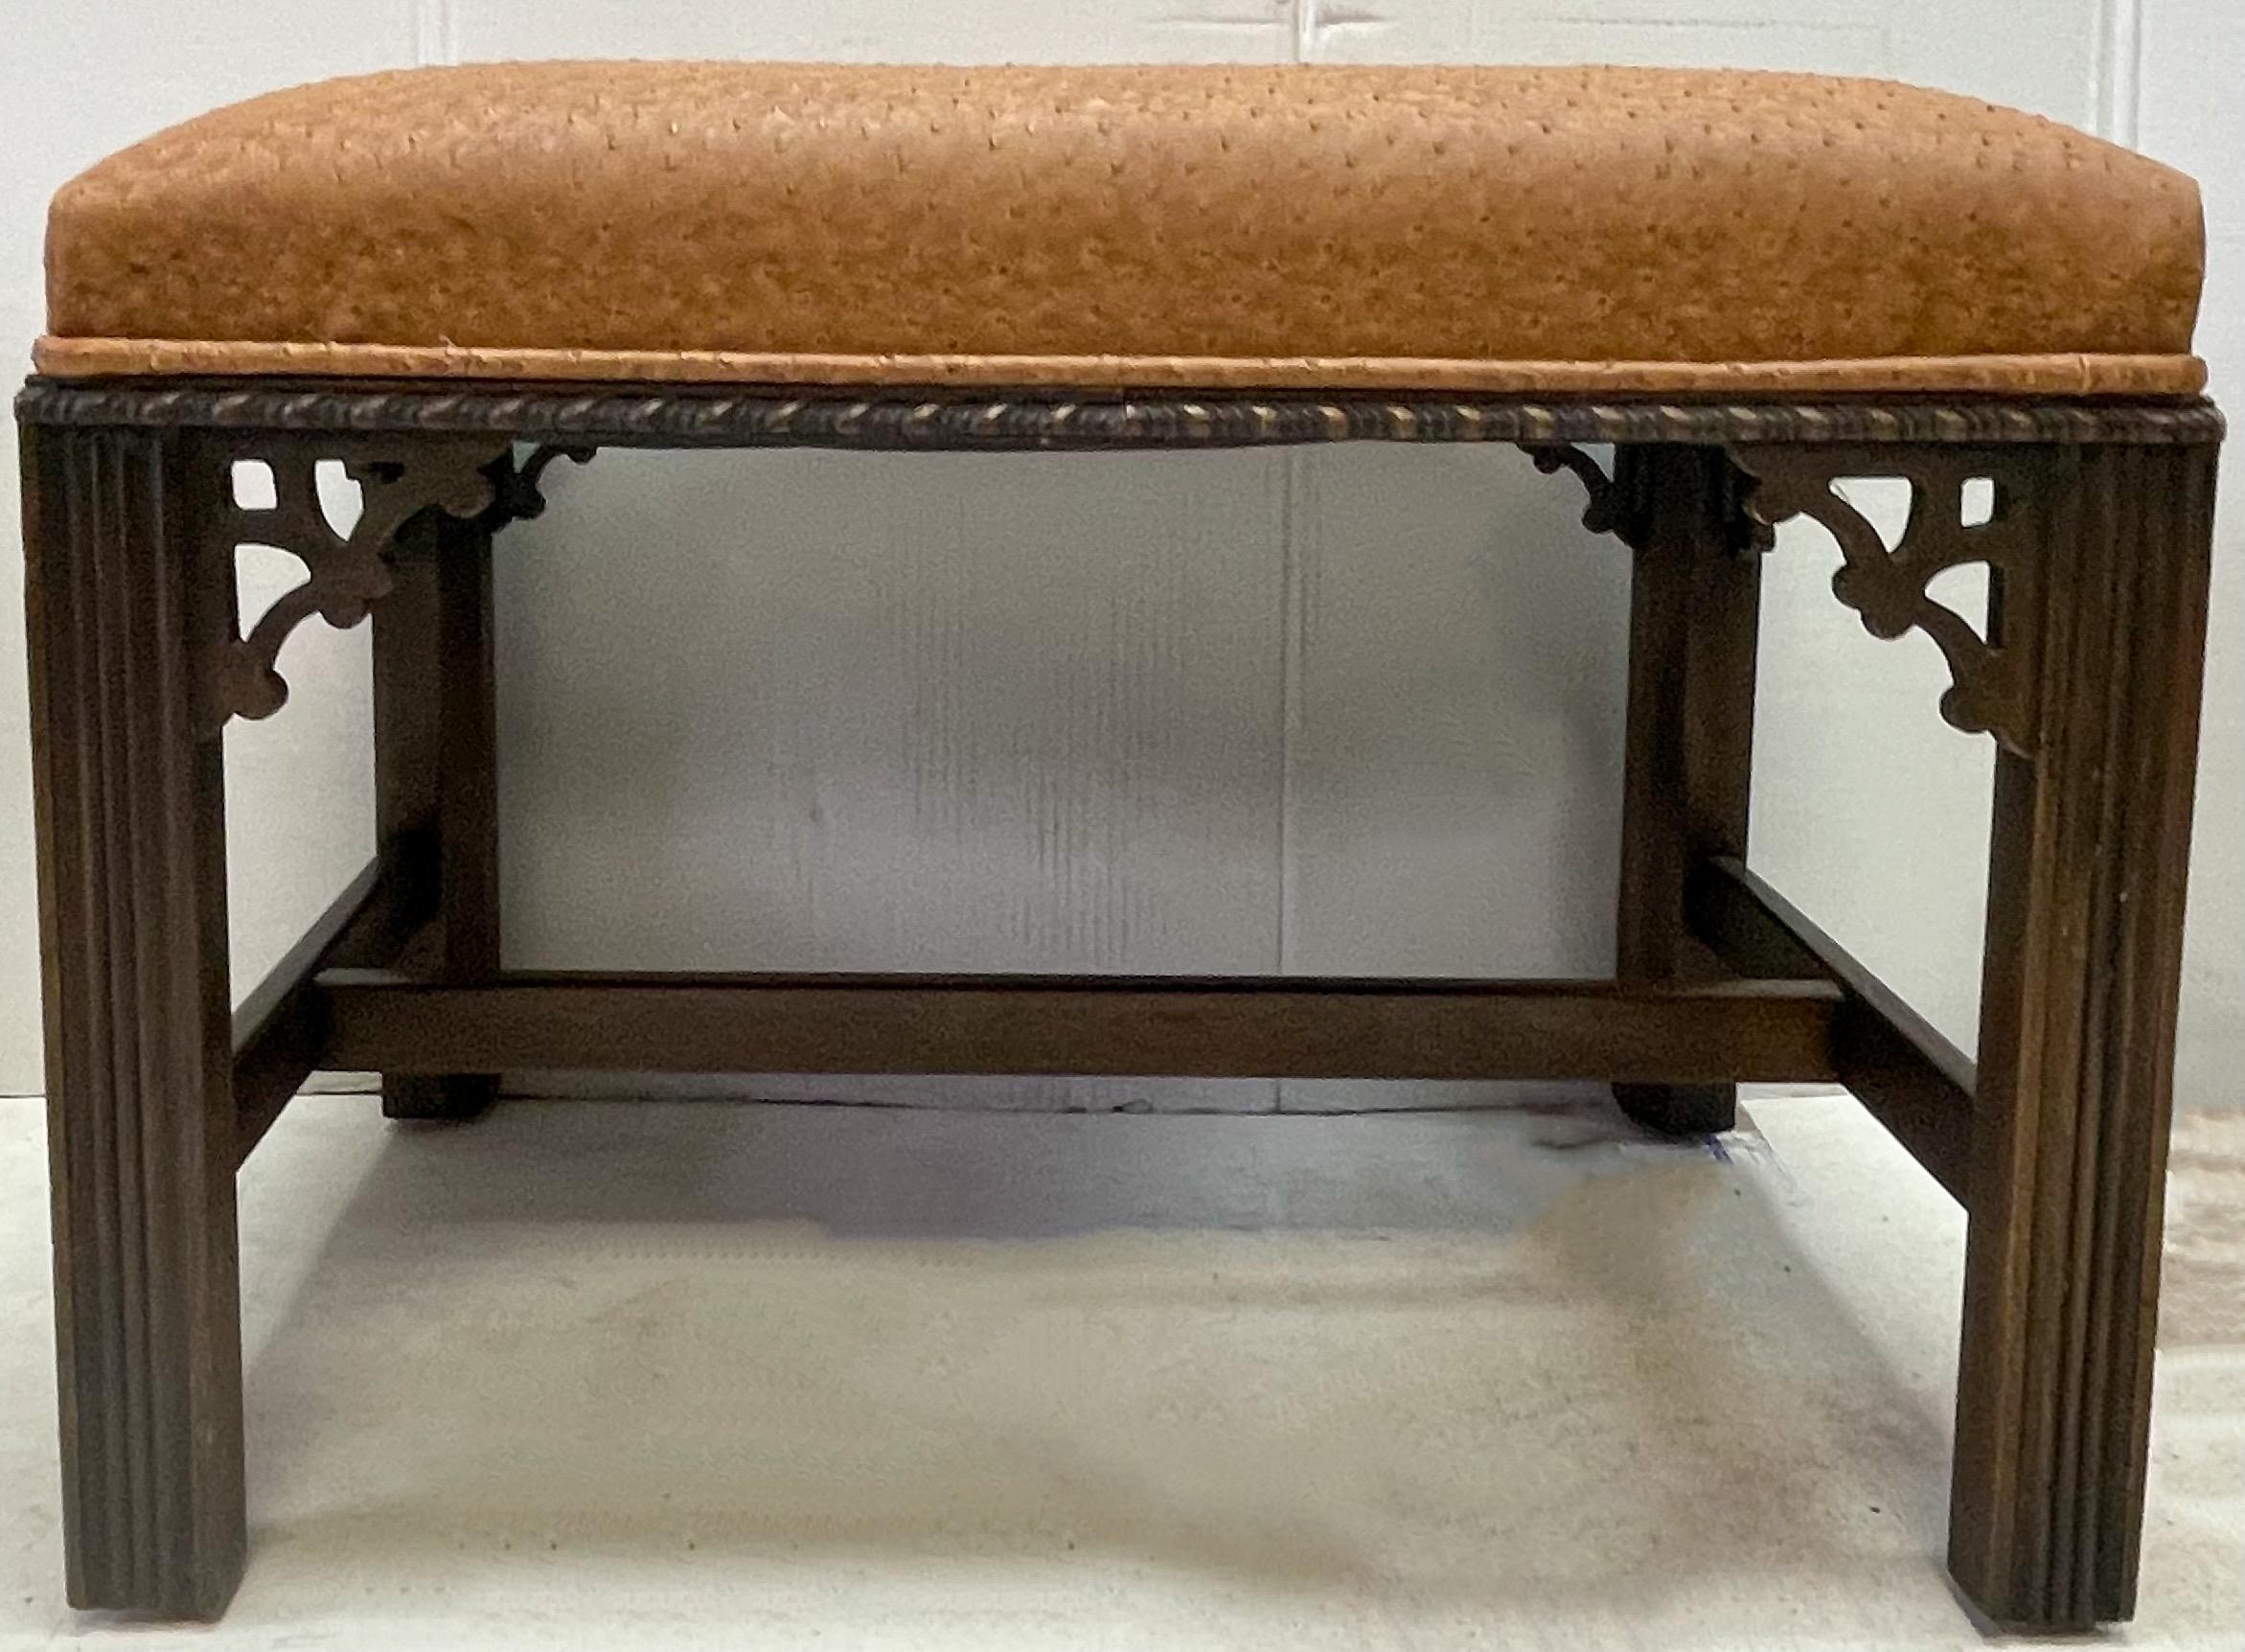 This is a handsome pair of Chinese chippendale style carved mahogany benches with ostrich leather upholstery. Both are in very good condition. They are unmarked.